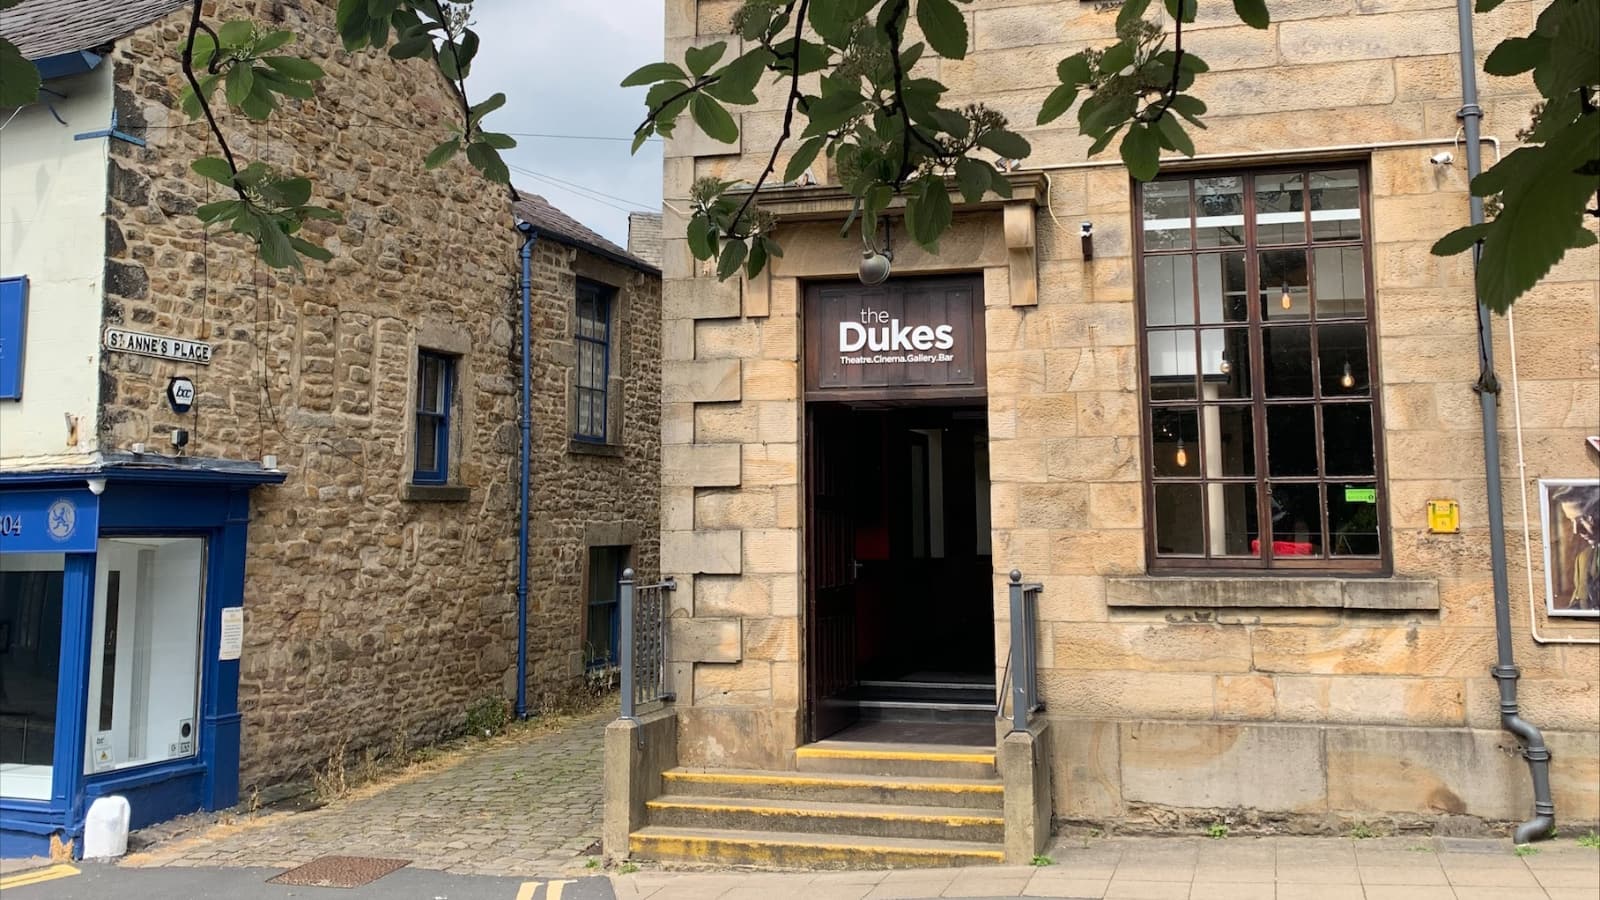 The Dukes Theatre from outside